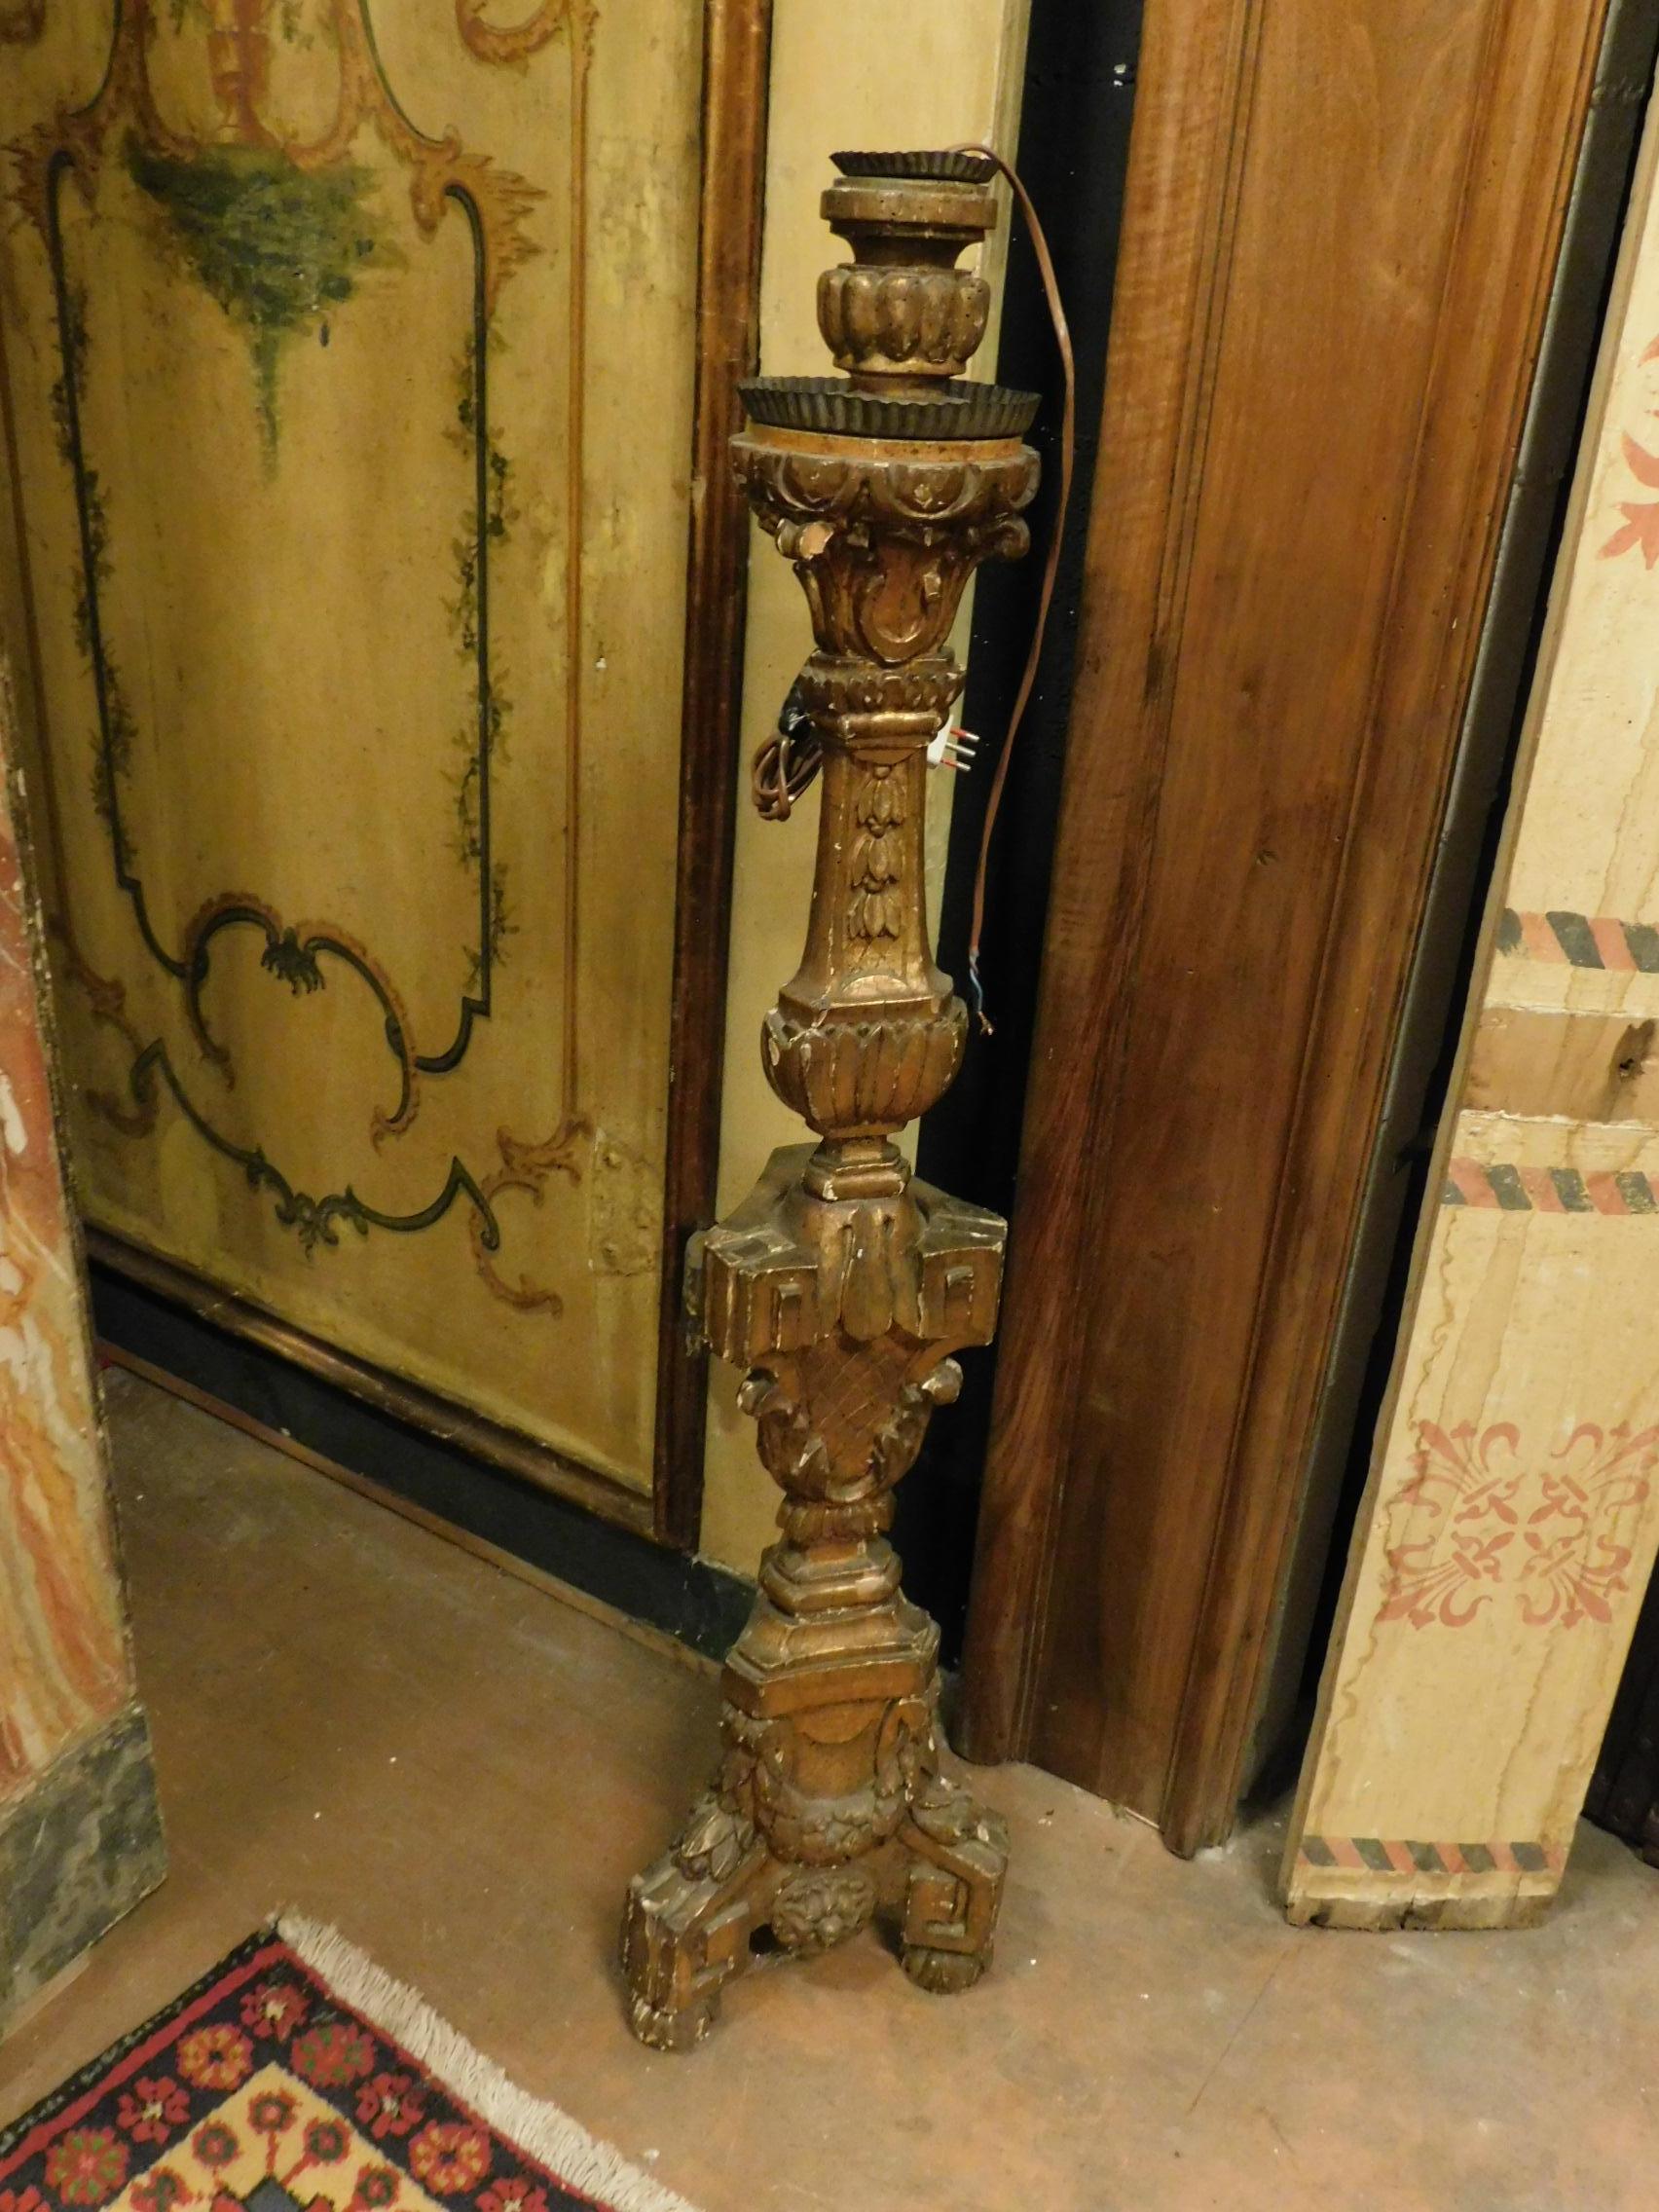 Antique candlestick used as a floor lamp, in carved wood and gilded with leaf, coming from northern Italy, 18th century, beautiful and elegant, already electro-magnetic with a modern plug, with a lampshade it will become a beautiful reading lamp or